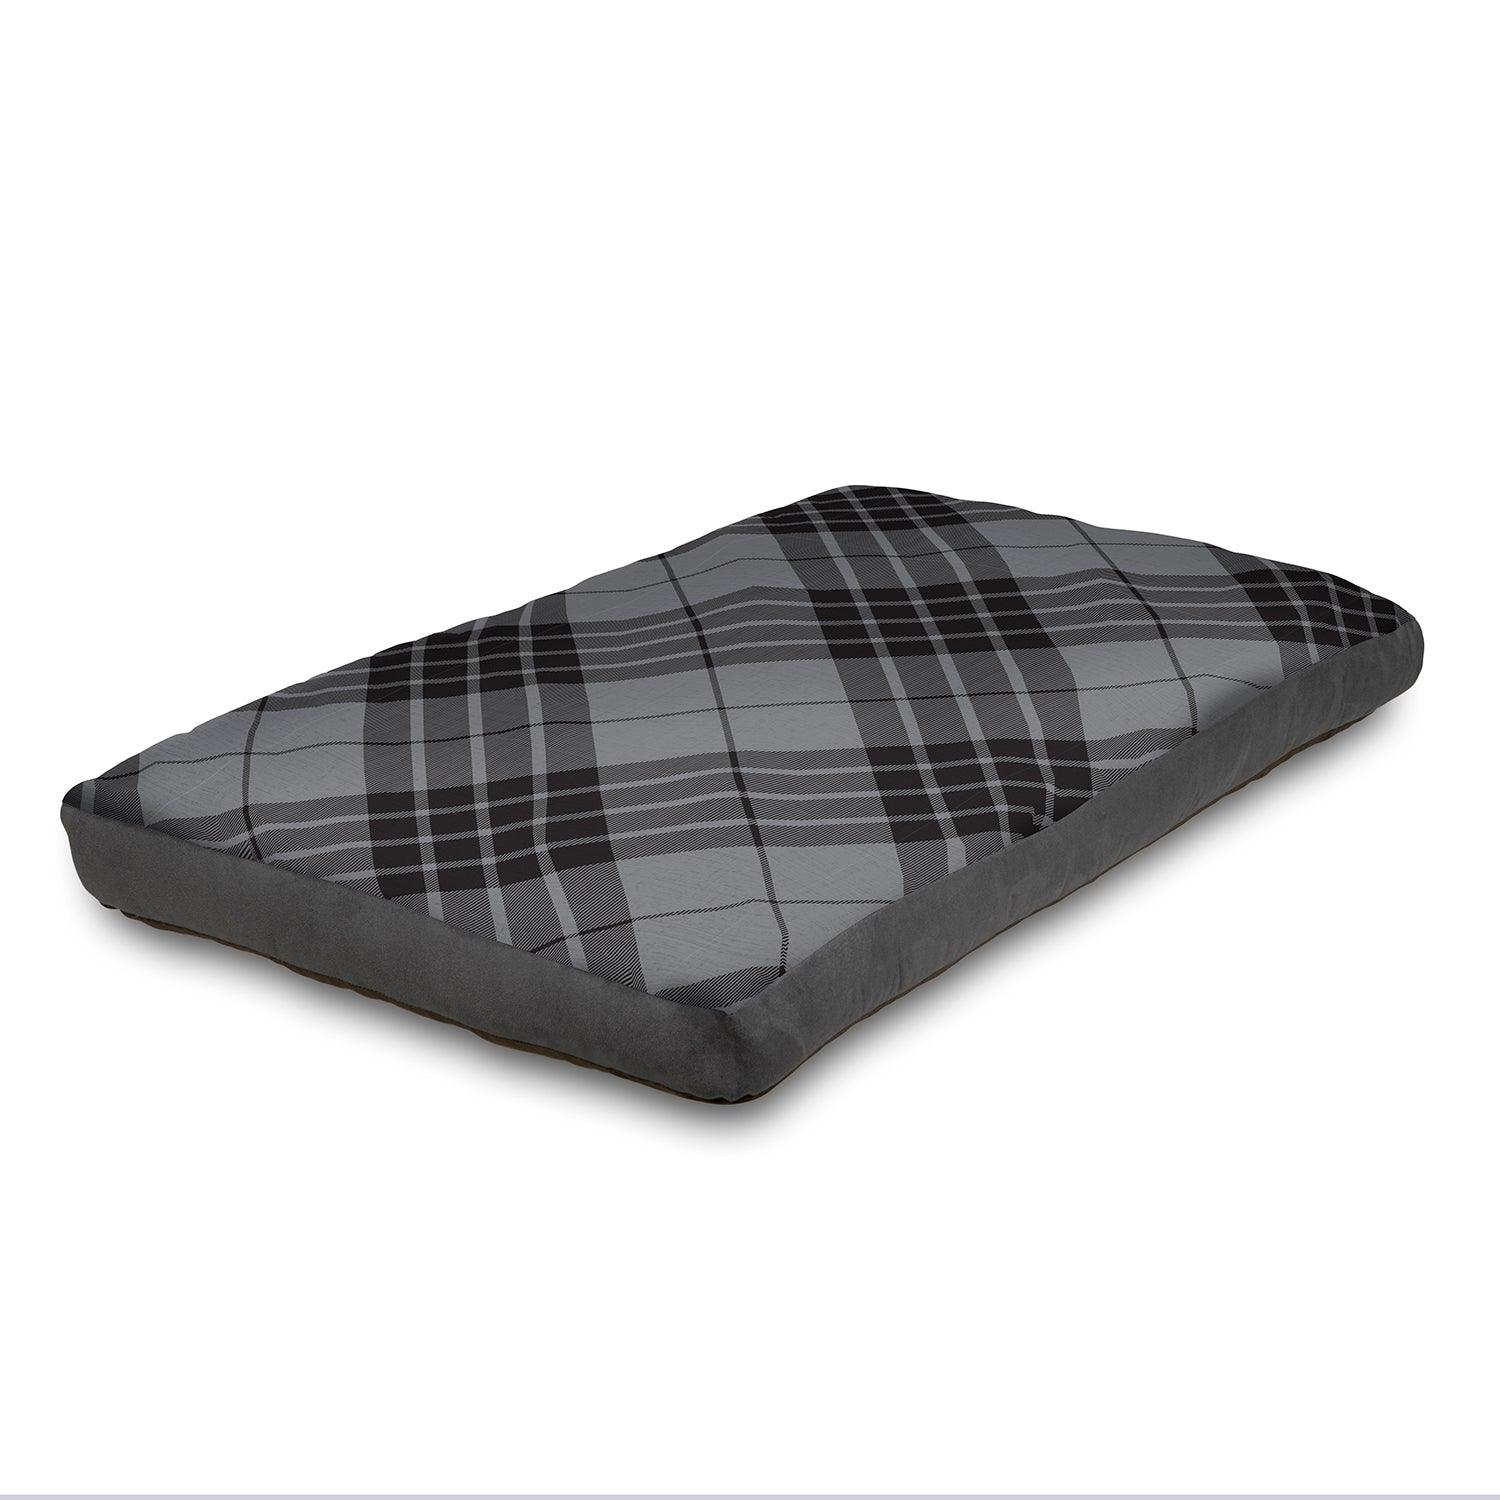 View Super Comfy Dog Bed Soft and Fluffy with Washable Cover XLarge 150 cm x 100 cm Black information